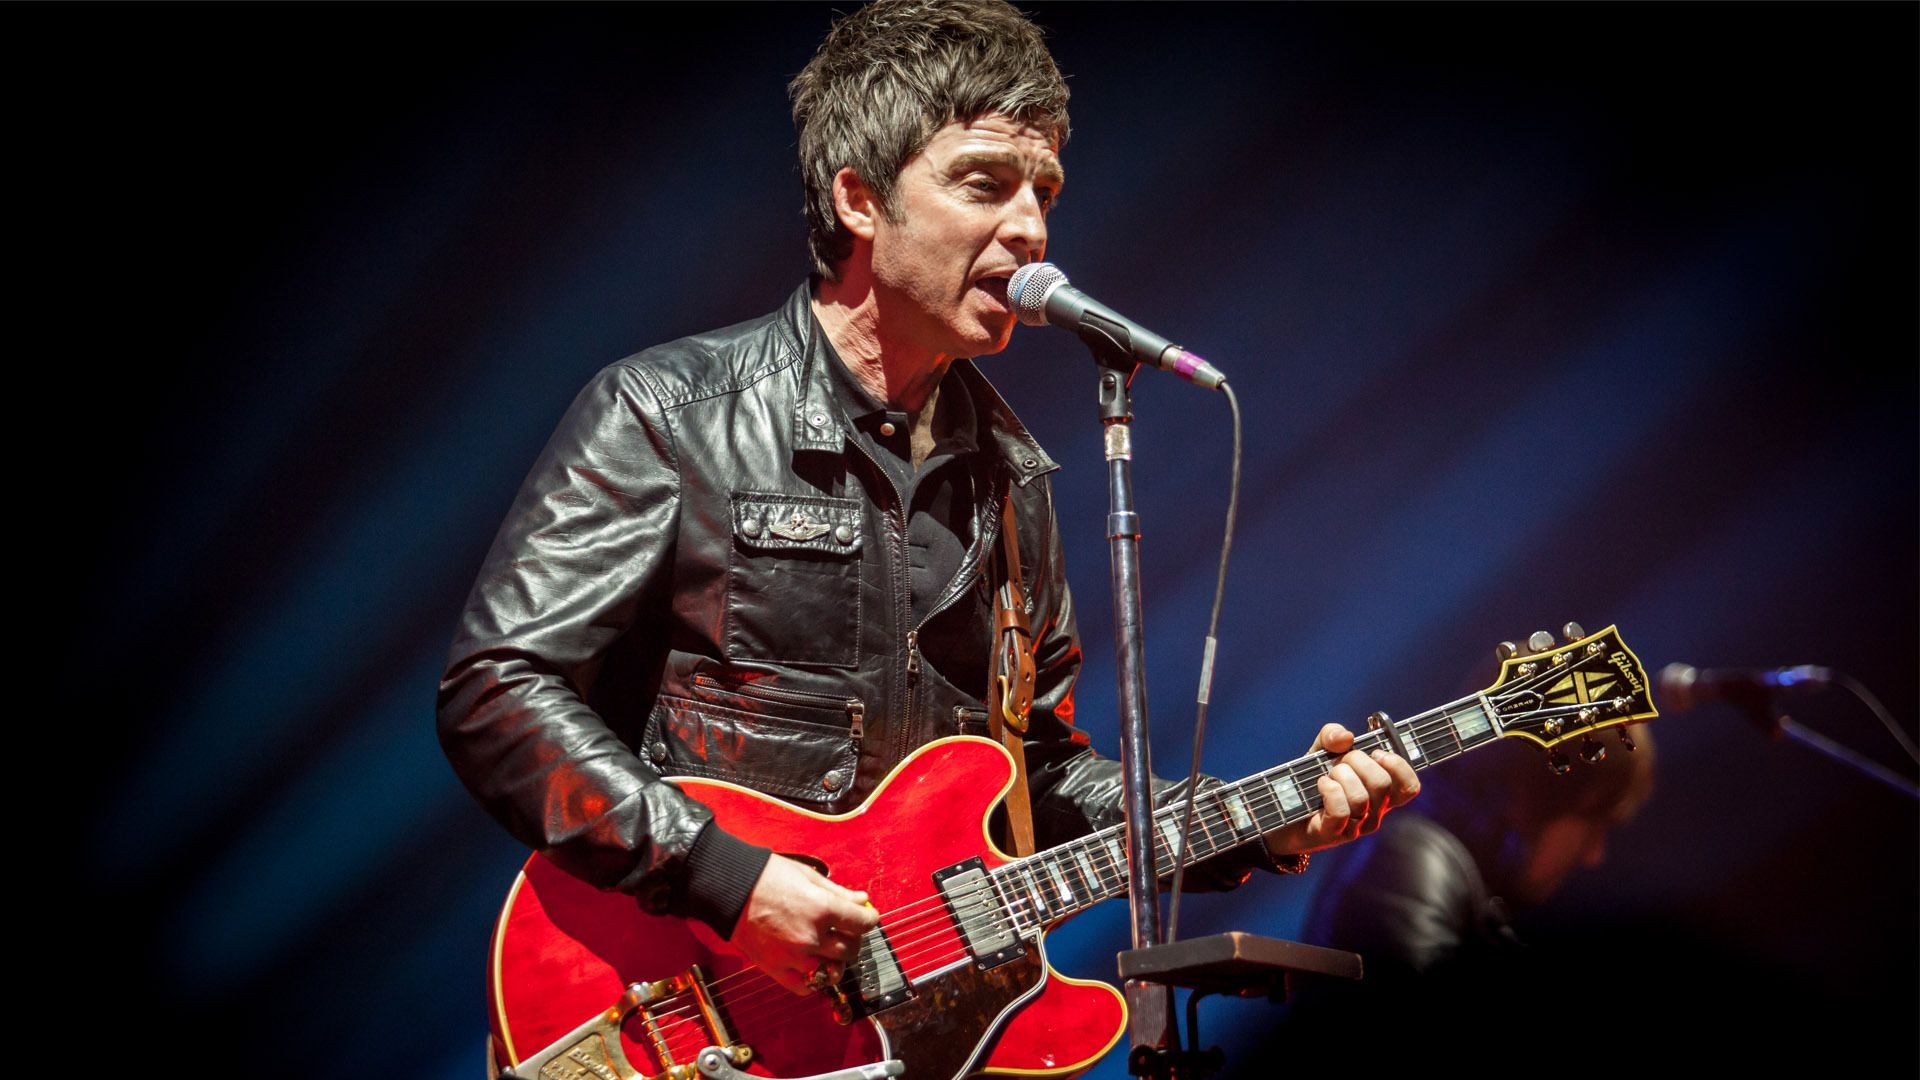 Noel Gallagher Wallpapers - Top Free Noel Gallagher Backgrounds 1920x1080